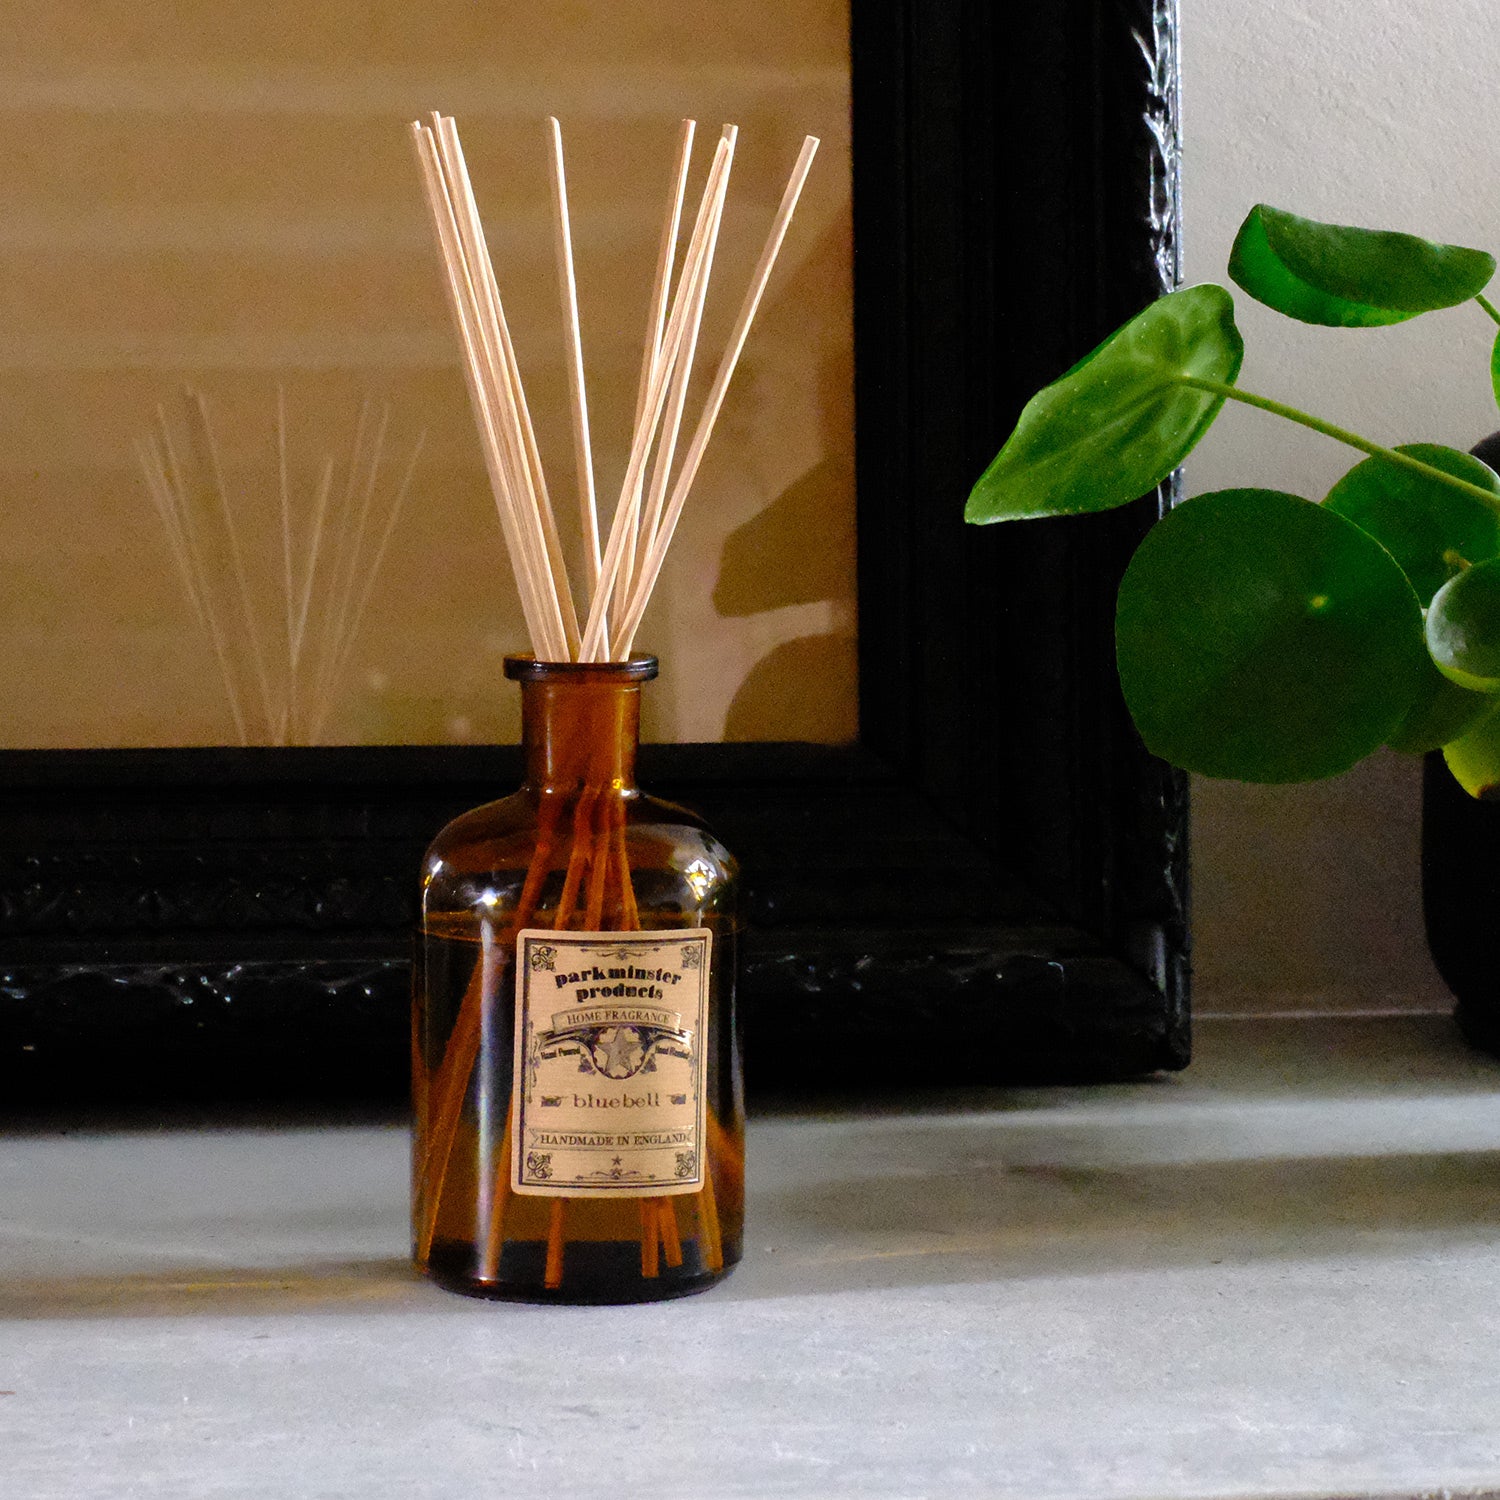 Spring-scented Bluebell Reed Diffuser from Parkminster, 200ml Apothecary Collection amber jar, handcrafted in Cornwall